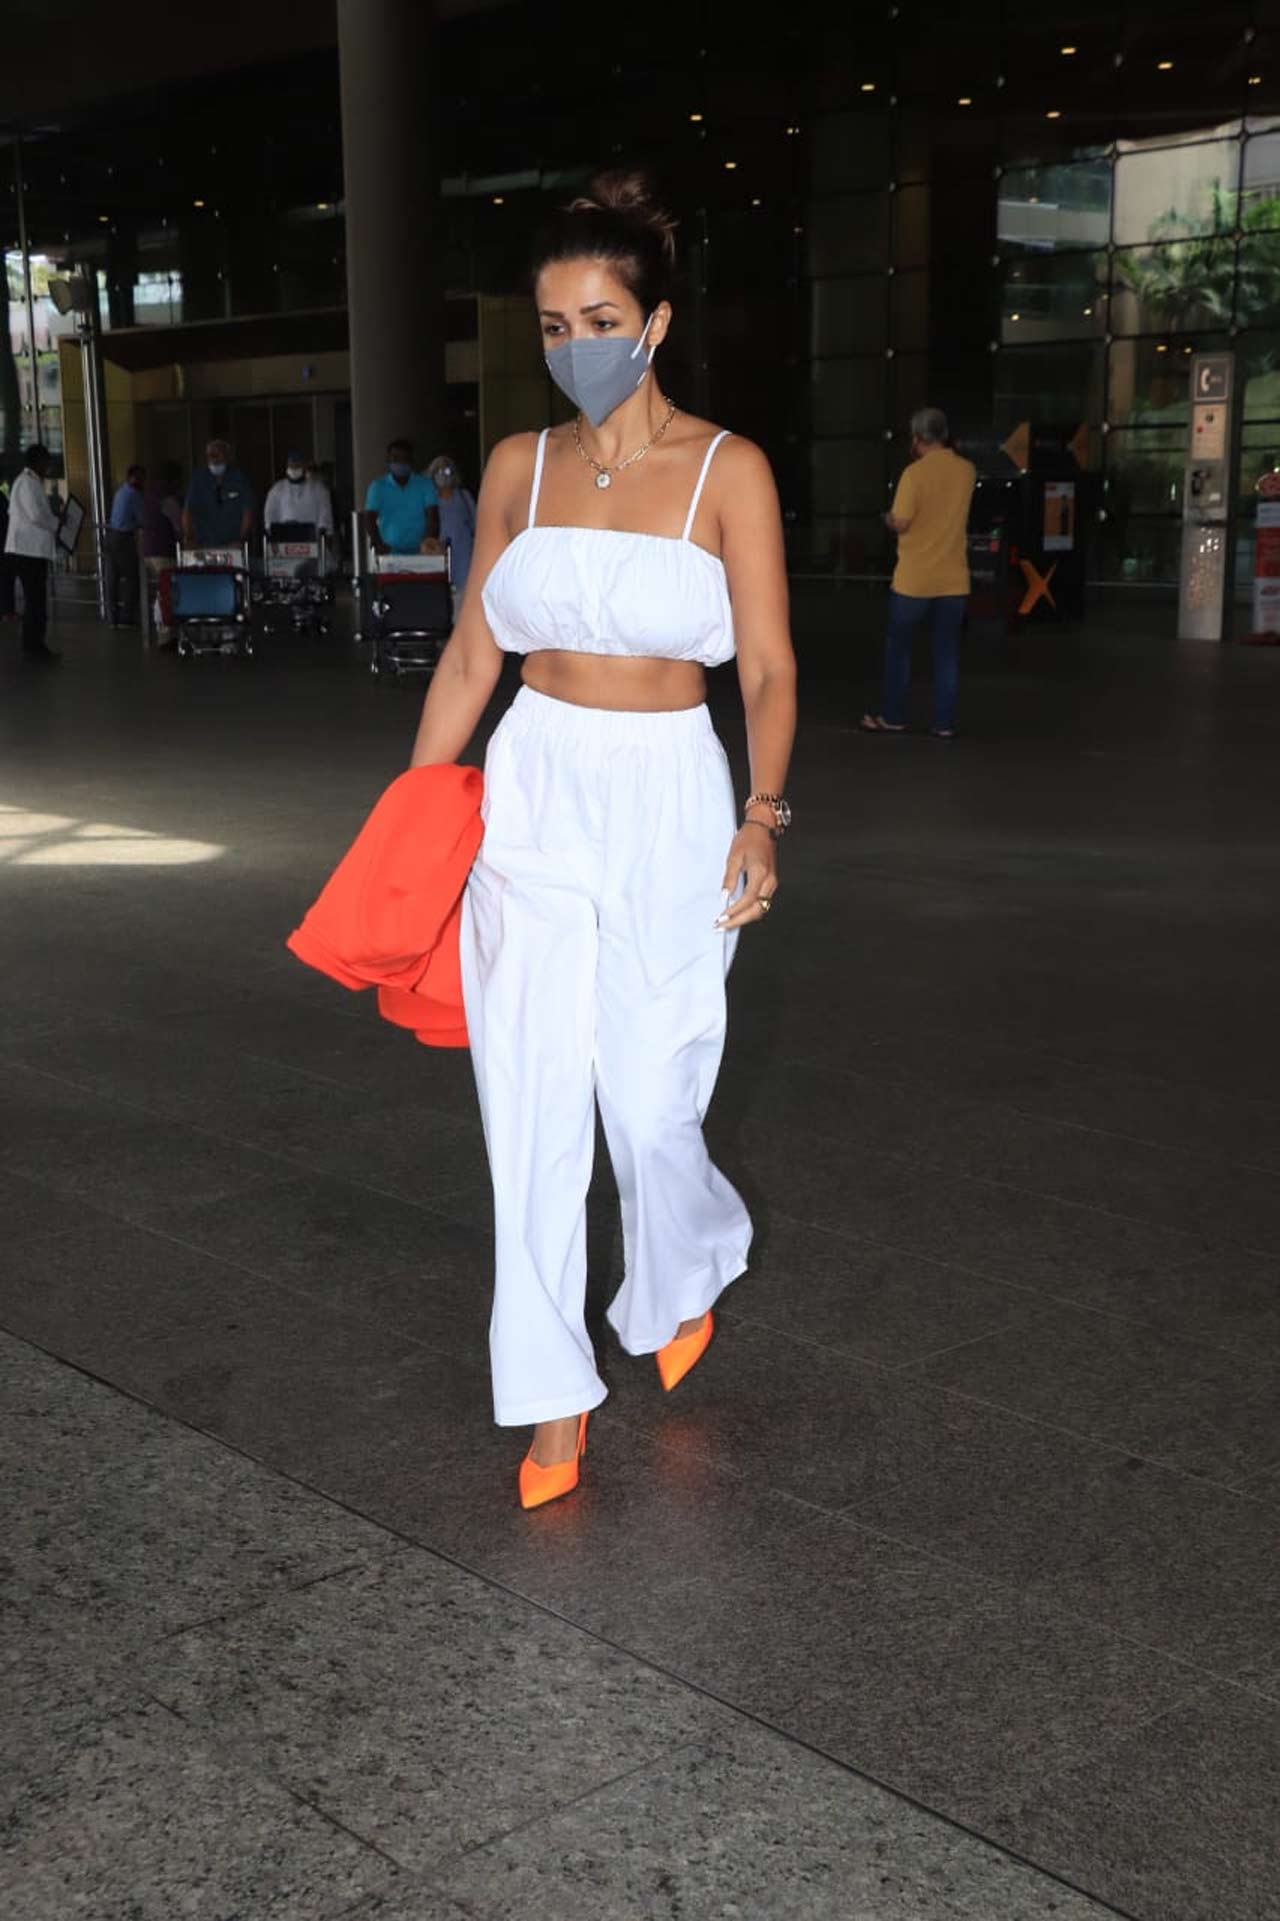 Malaika Arora's white crop top, paired with white pants as her airport look left the fashionistas crazy on social media. Time and again, Malaika and her fashion choices have left everyone in awe of her perfectly picked ensemble.